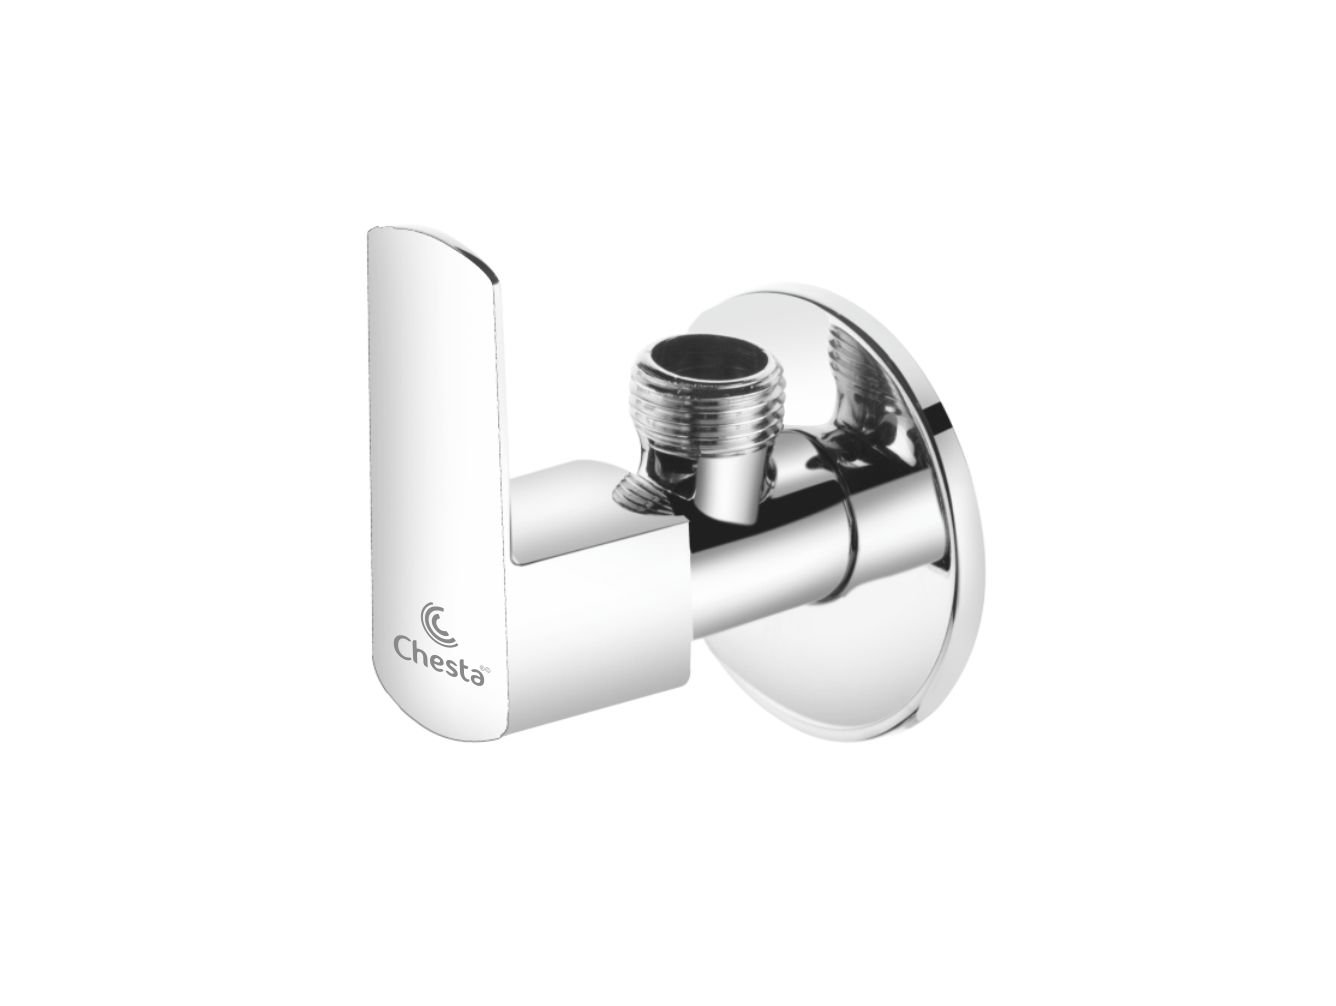 BL - 1003 - Angle Cock with Wall Flange at Chesta Bath Fittings